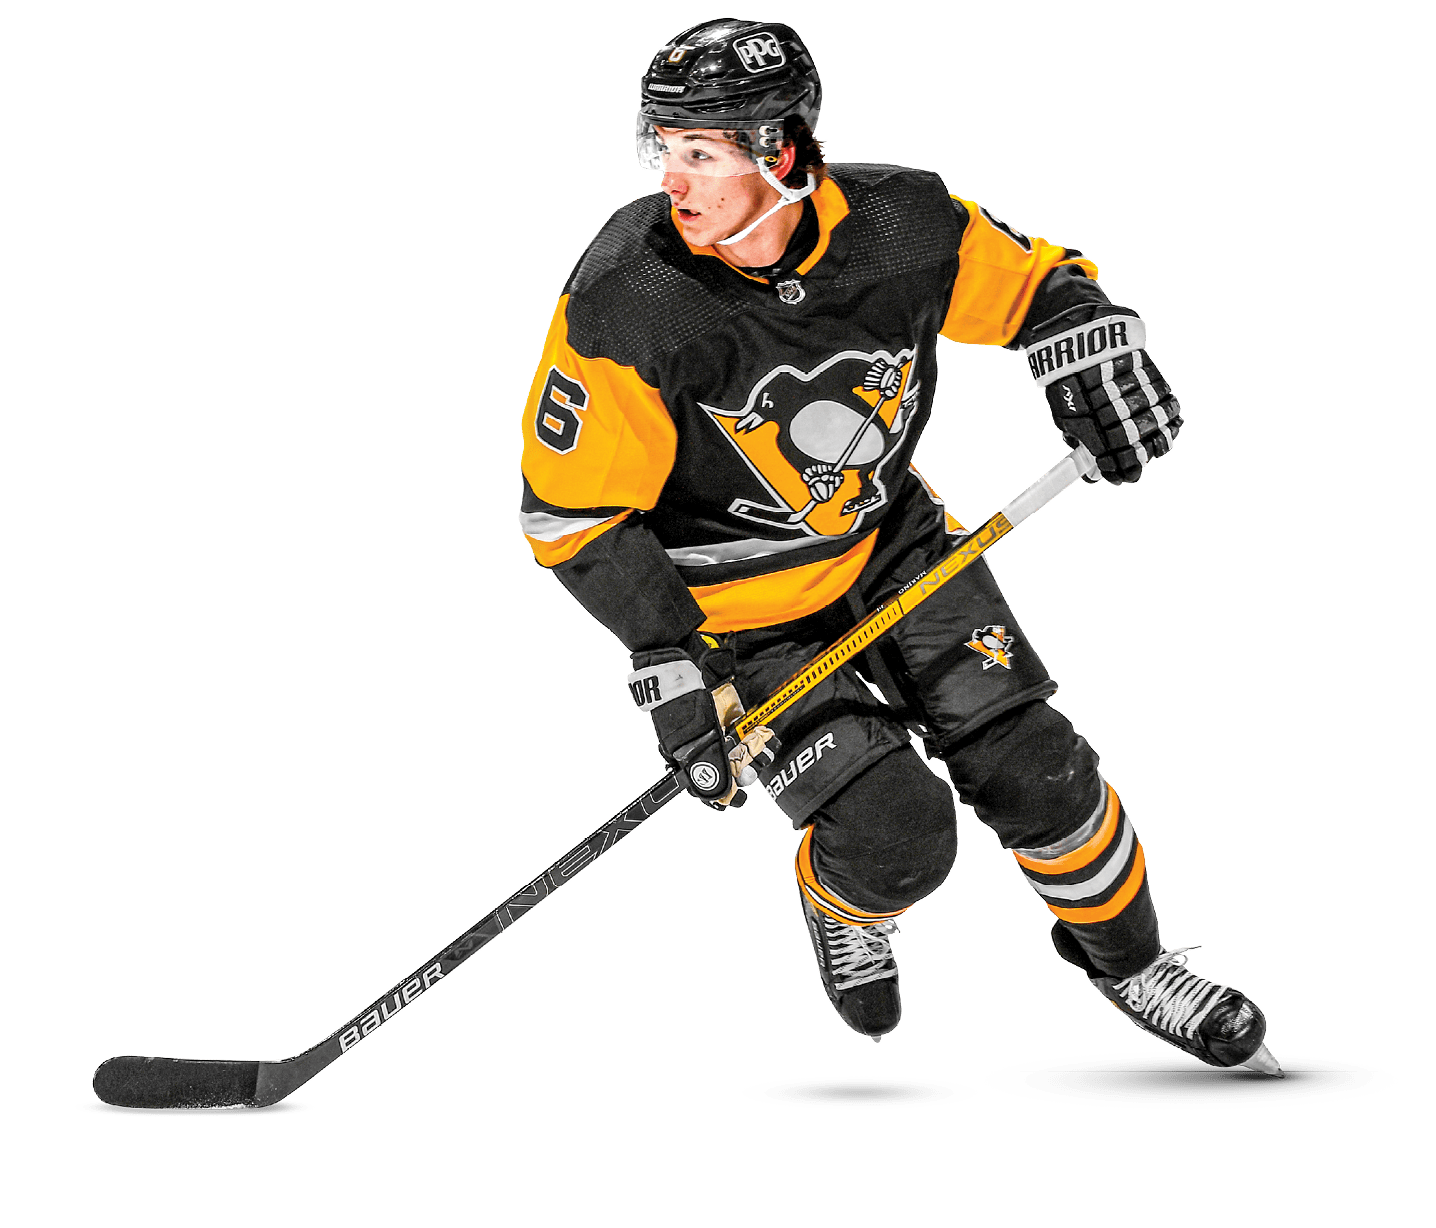 February 14, 2021 - Pittsburgh Penguins vs Washington Capitals at PPG Paints Arena  Pittsburgh won the game 6-3 